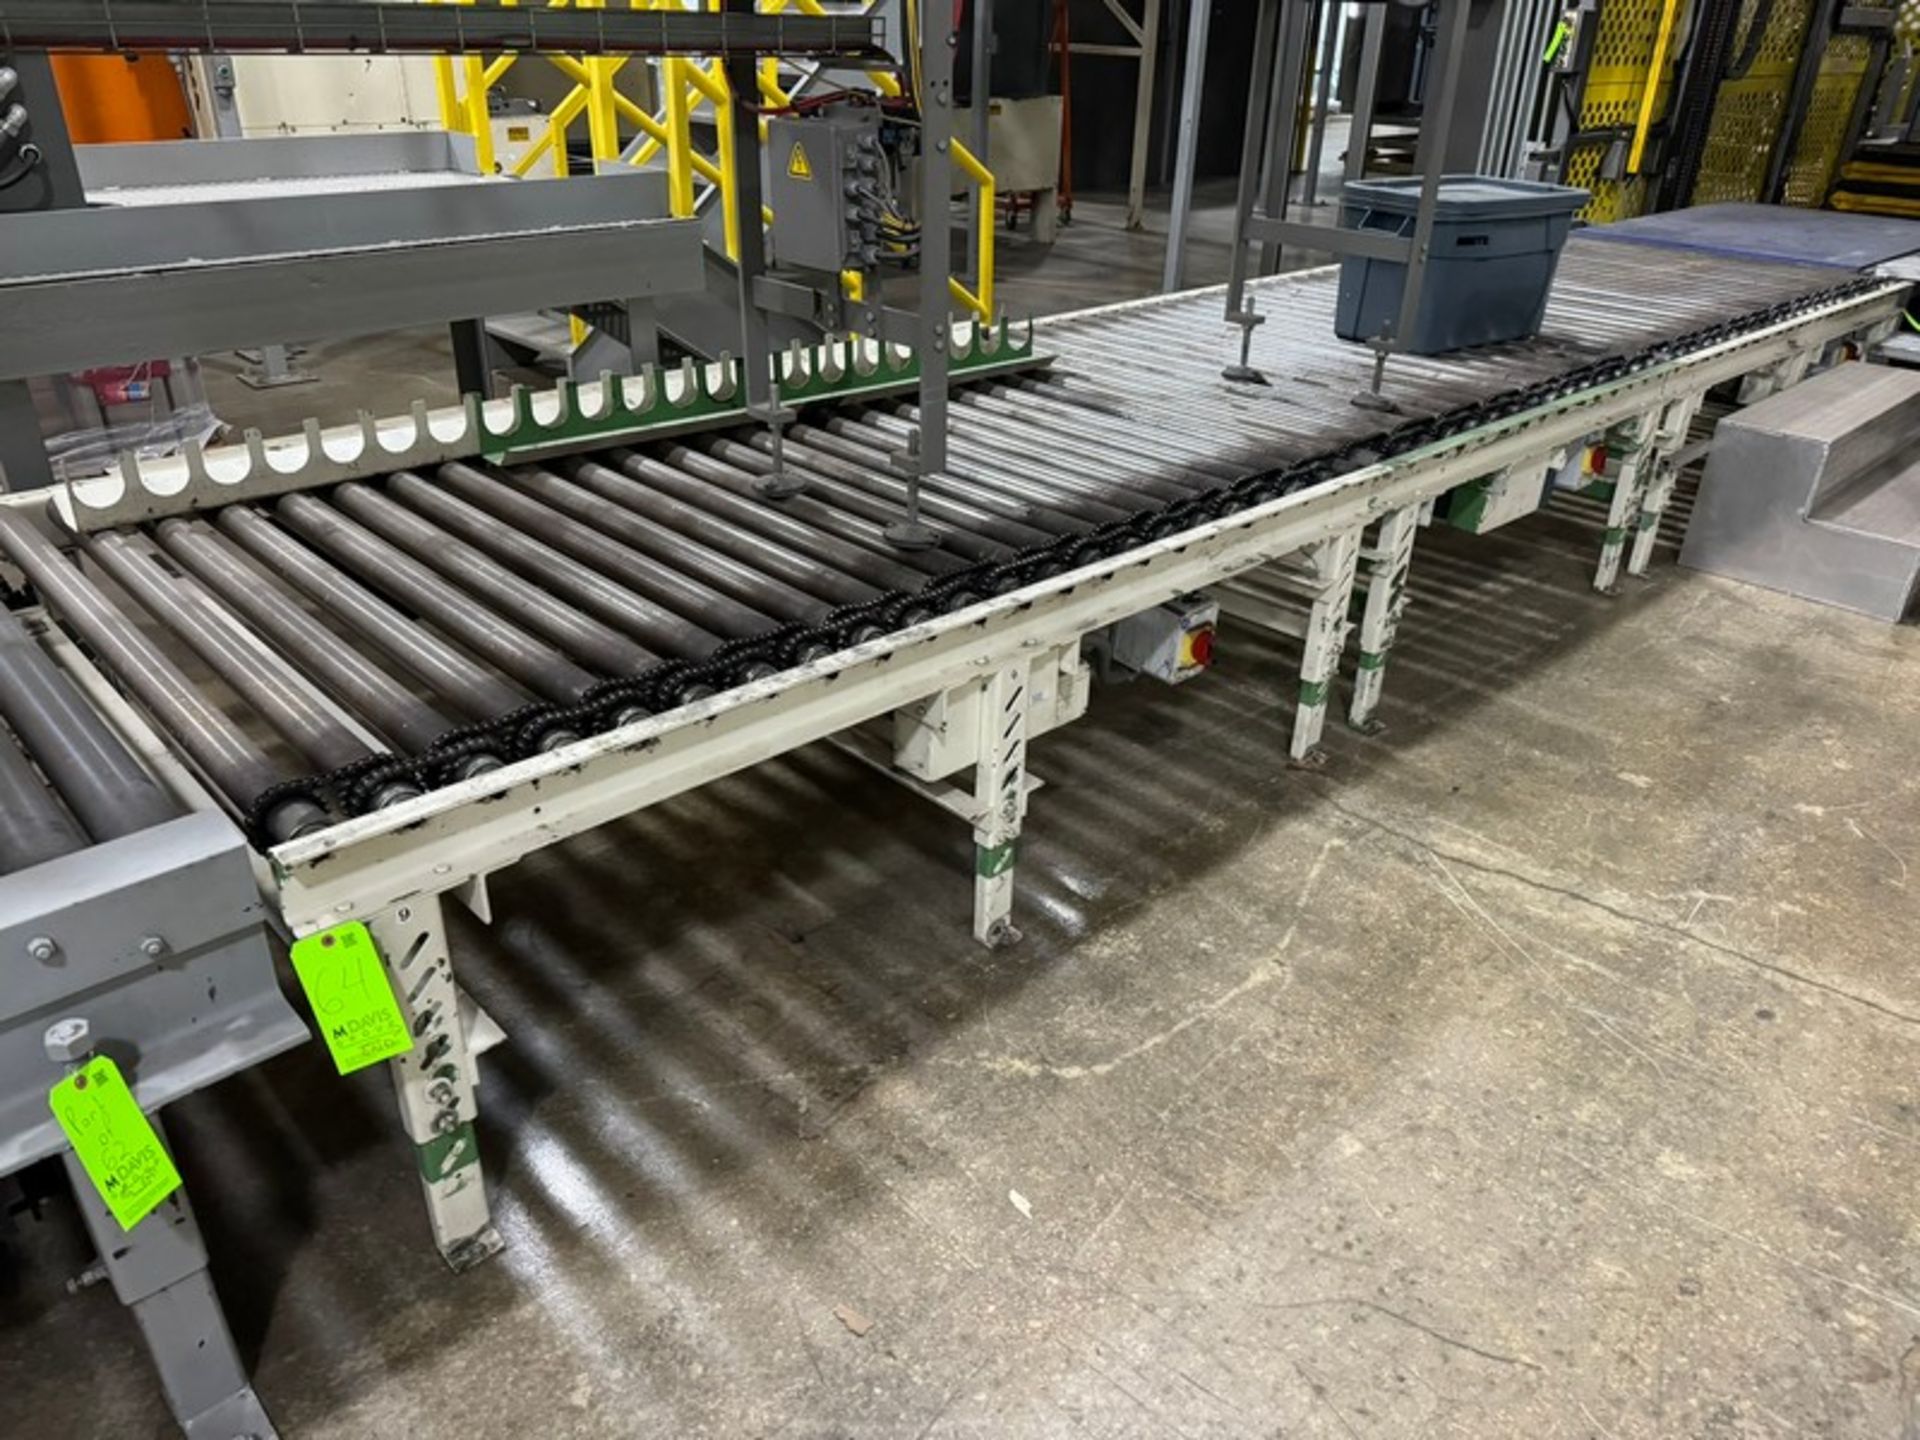 (2) Straight Sections of Infeed Roller Conveyor, with Aprox. 52” W Rolls, Total Length Aprox. 20 ft.